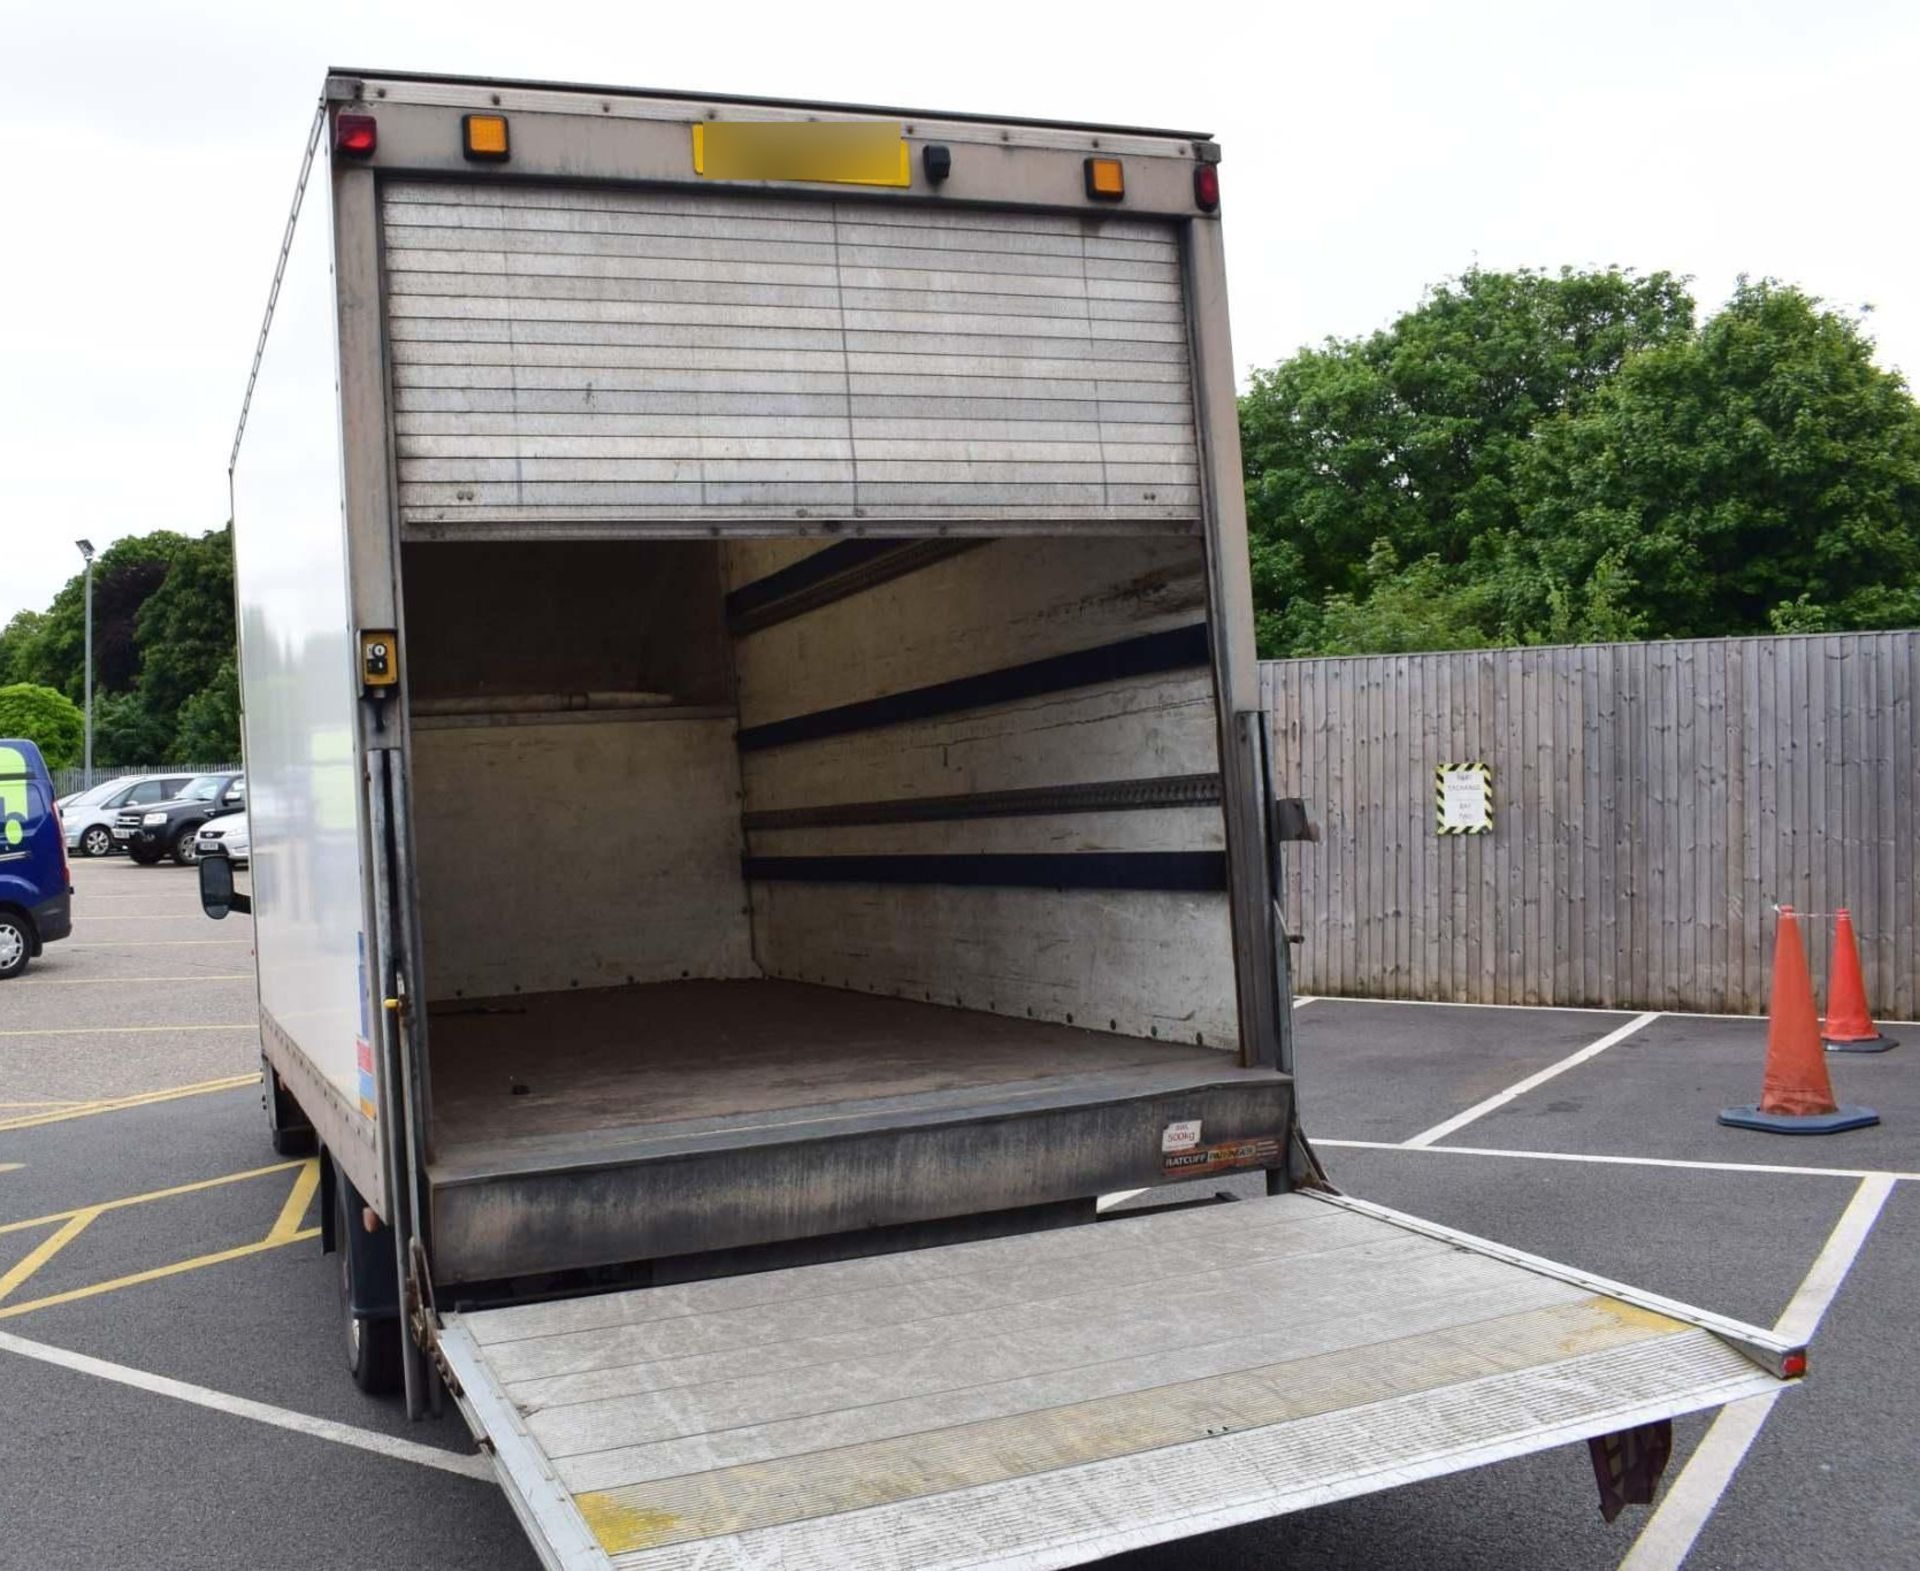 2008 Ford Transit 2.4 TDCi 350 Luton Body c/w Tail Lift - CL505 - Location: Corby, - Image 14 of 19